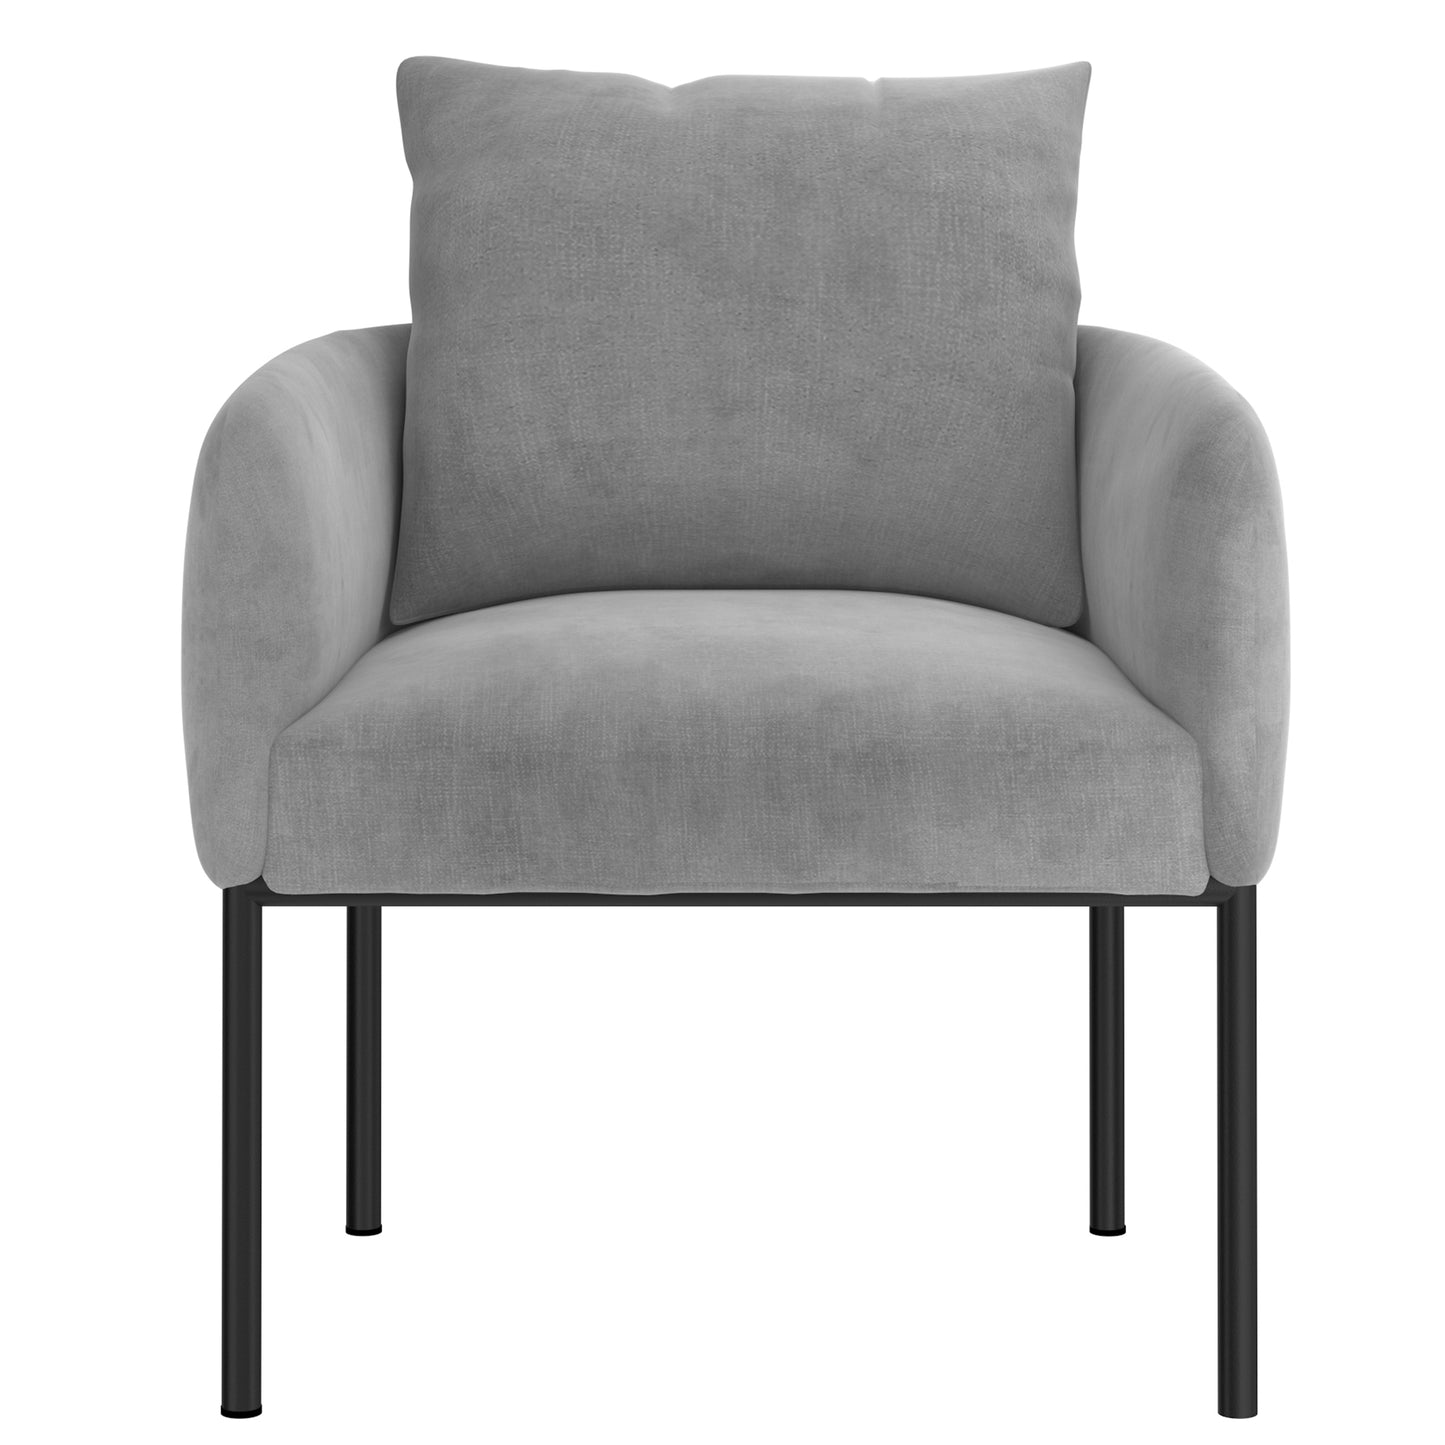 (PETRIE GREY) - FABRIC ACCENT CHAIR